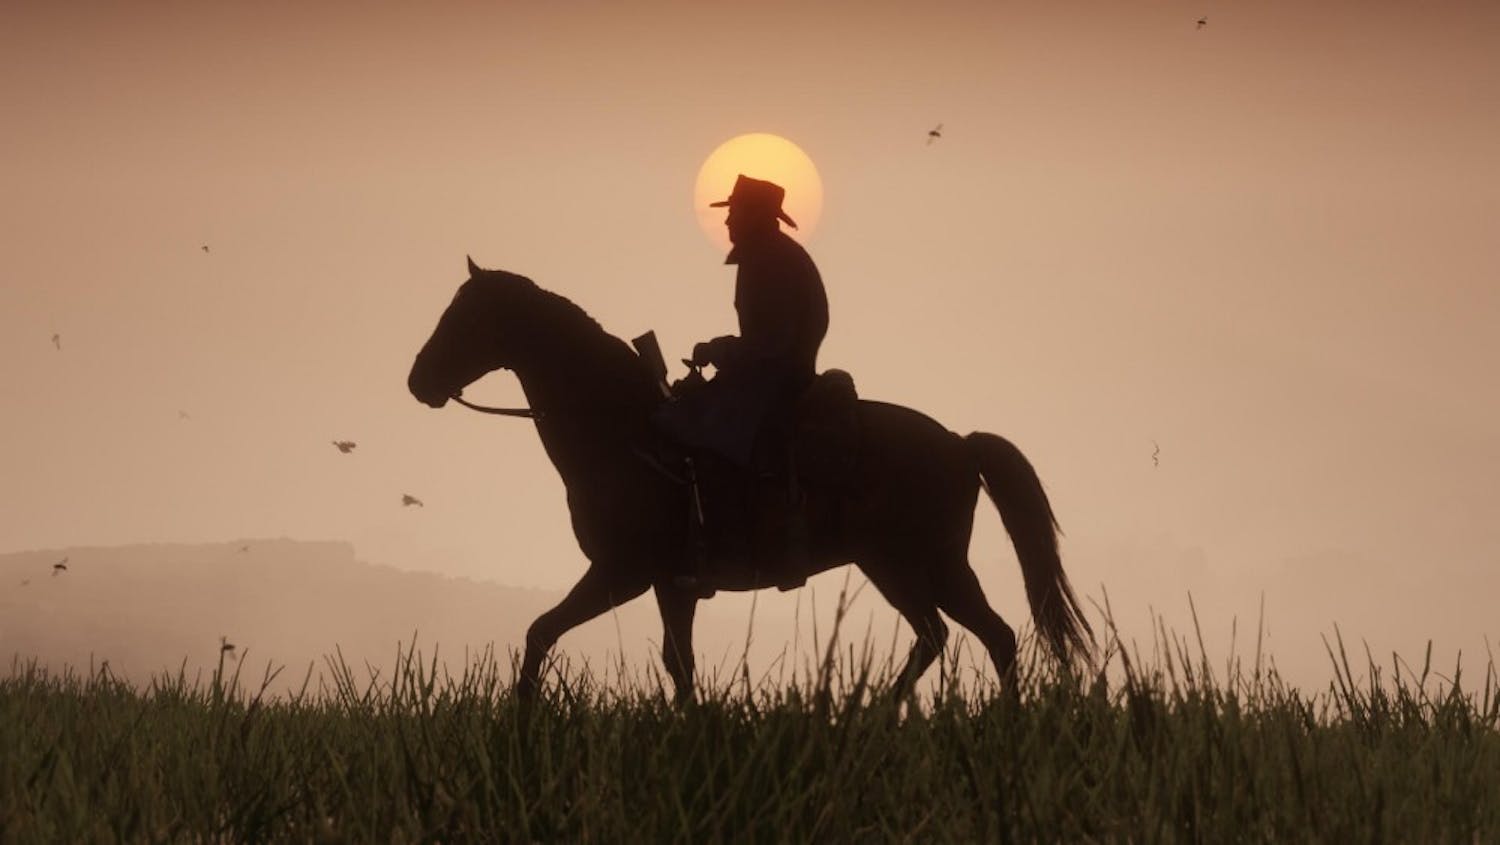 Compared to Rockstar's earlier&nbsp;games, “Red Dead Redemption 2” feels like a visual novel, more a simulation of what life as a highwayman in late-19th century America may have been like than an arcade machine for the player’s amusement.